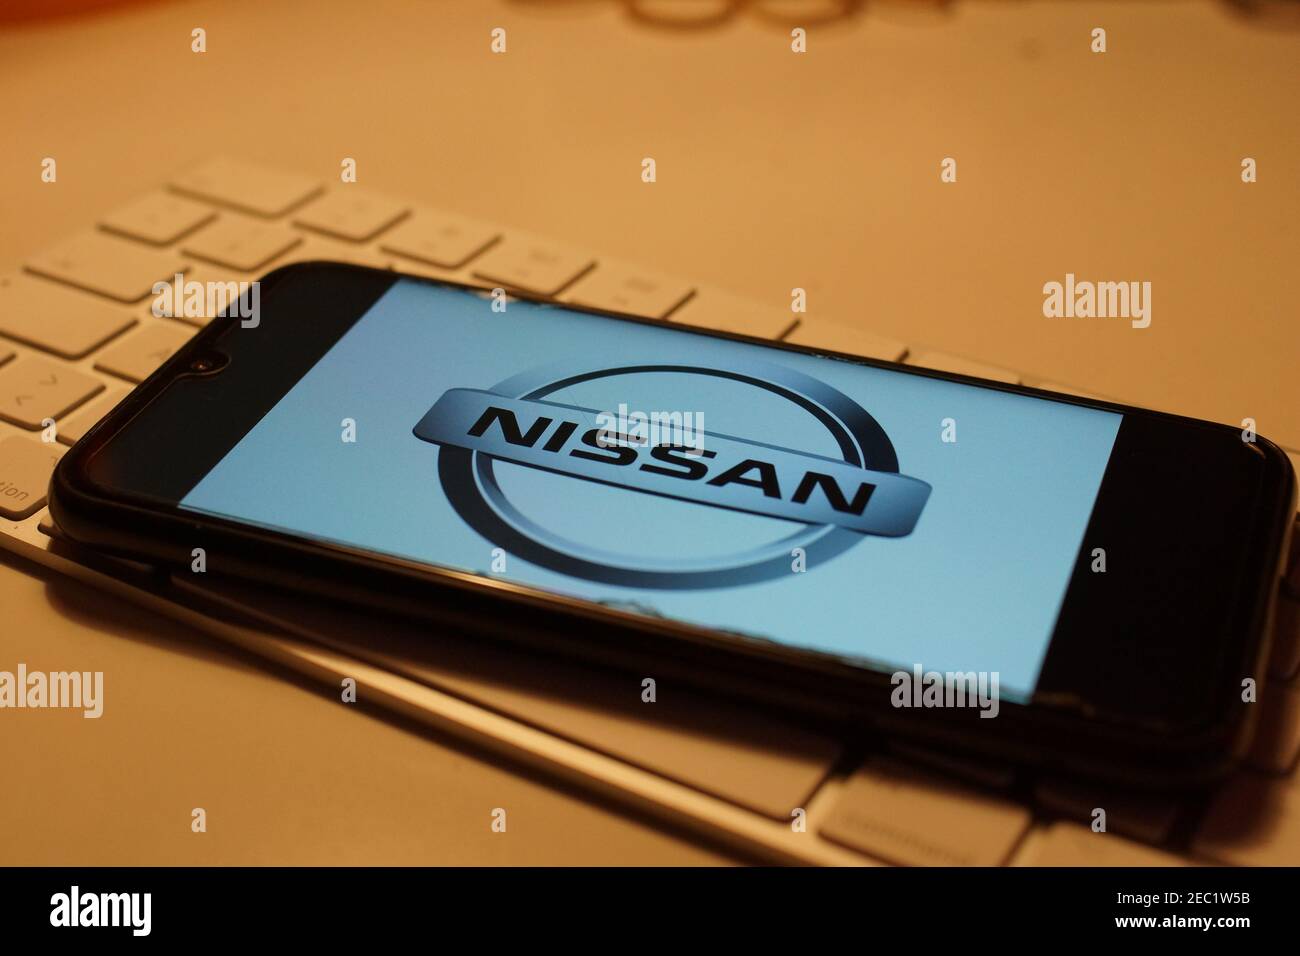 Smartphone with Nissan logo on computer keyboard Stock Photo